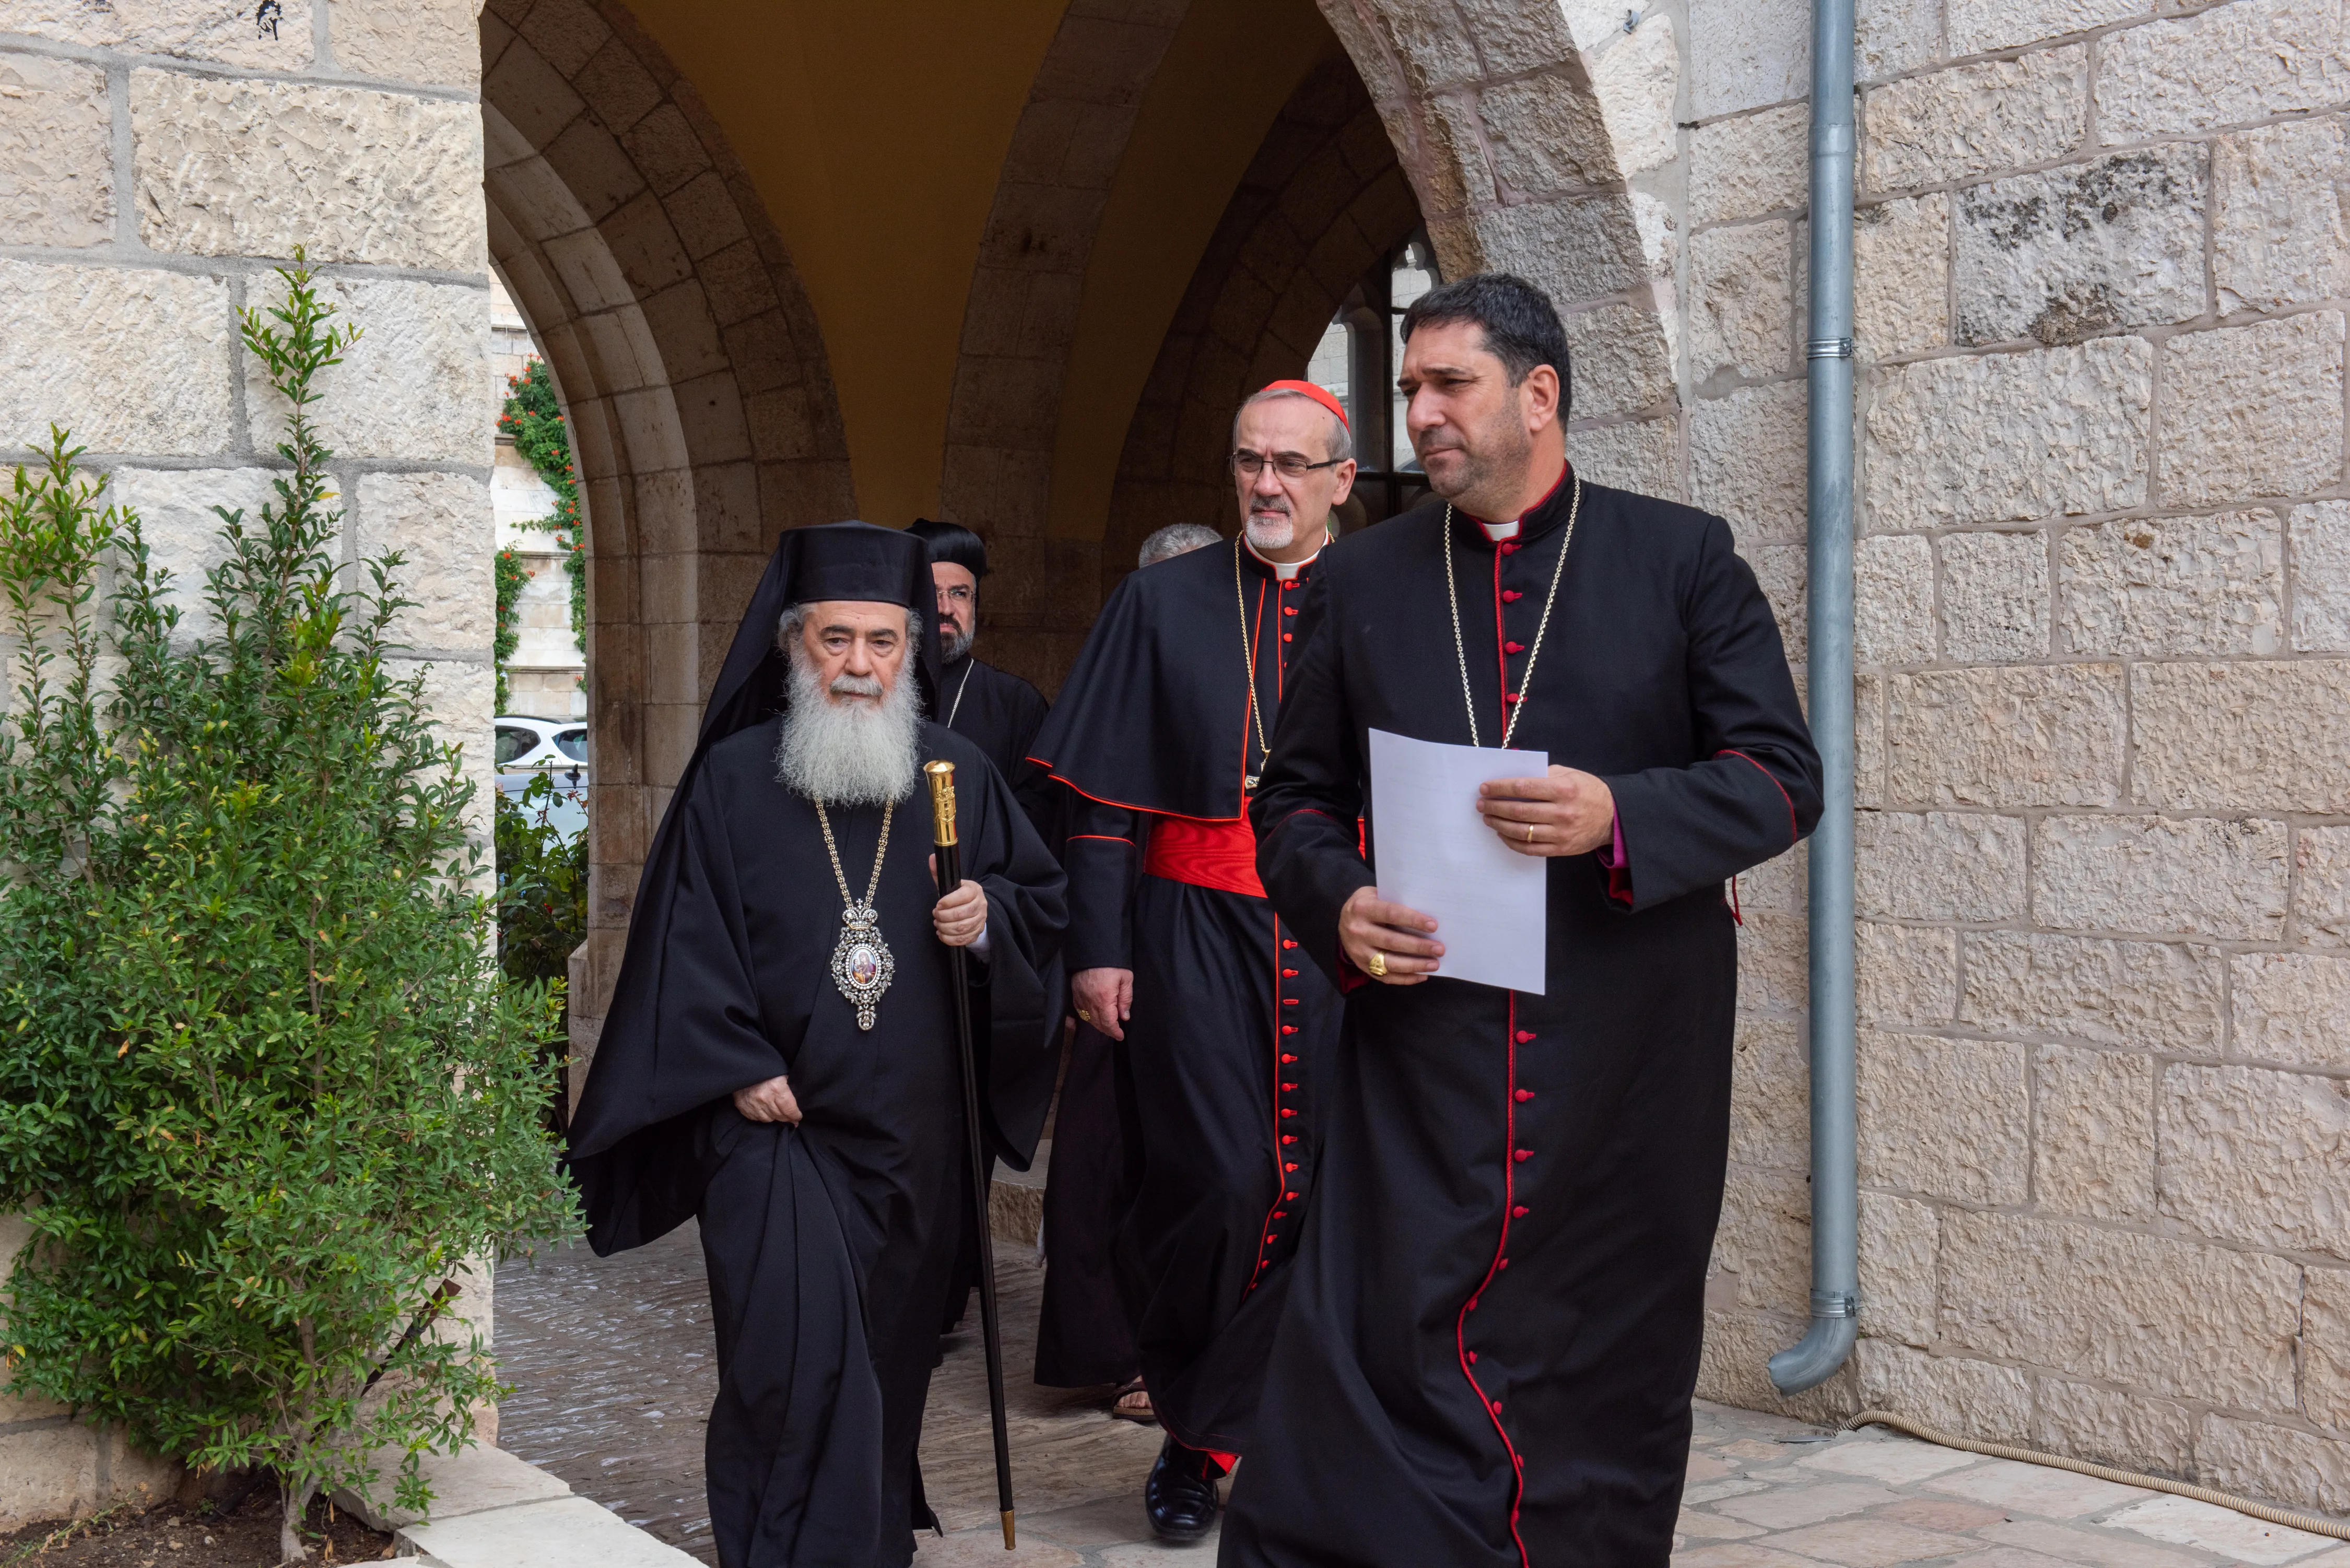 The Patriarchs and Heads of the Churches in Jerusalem arrive at a press conference, Oct 18, 2023. The Anglican bishop Hosam Naum is followed by Cardinal Pierbattista Pizzaballa, Latin patriarch of Jerusalem, and Theophilos III, Greek Orthodox patriarch of Jerusalem.?w=200&h=150